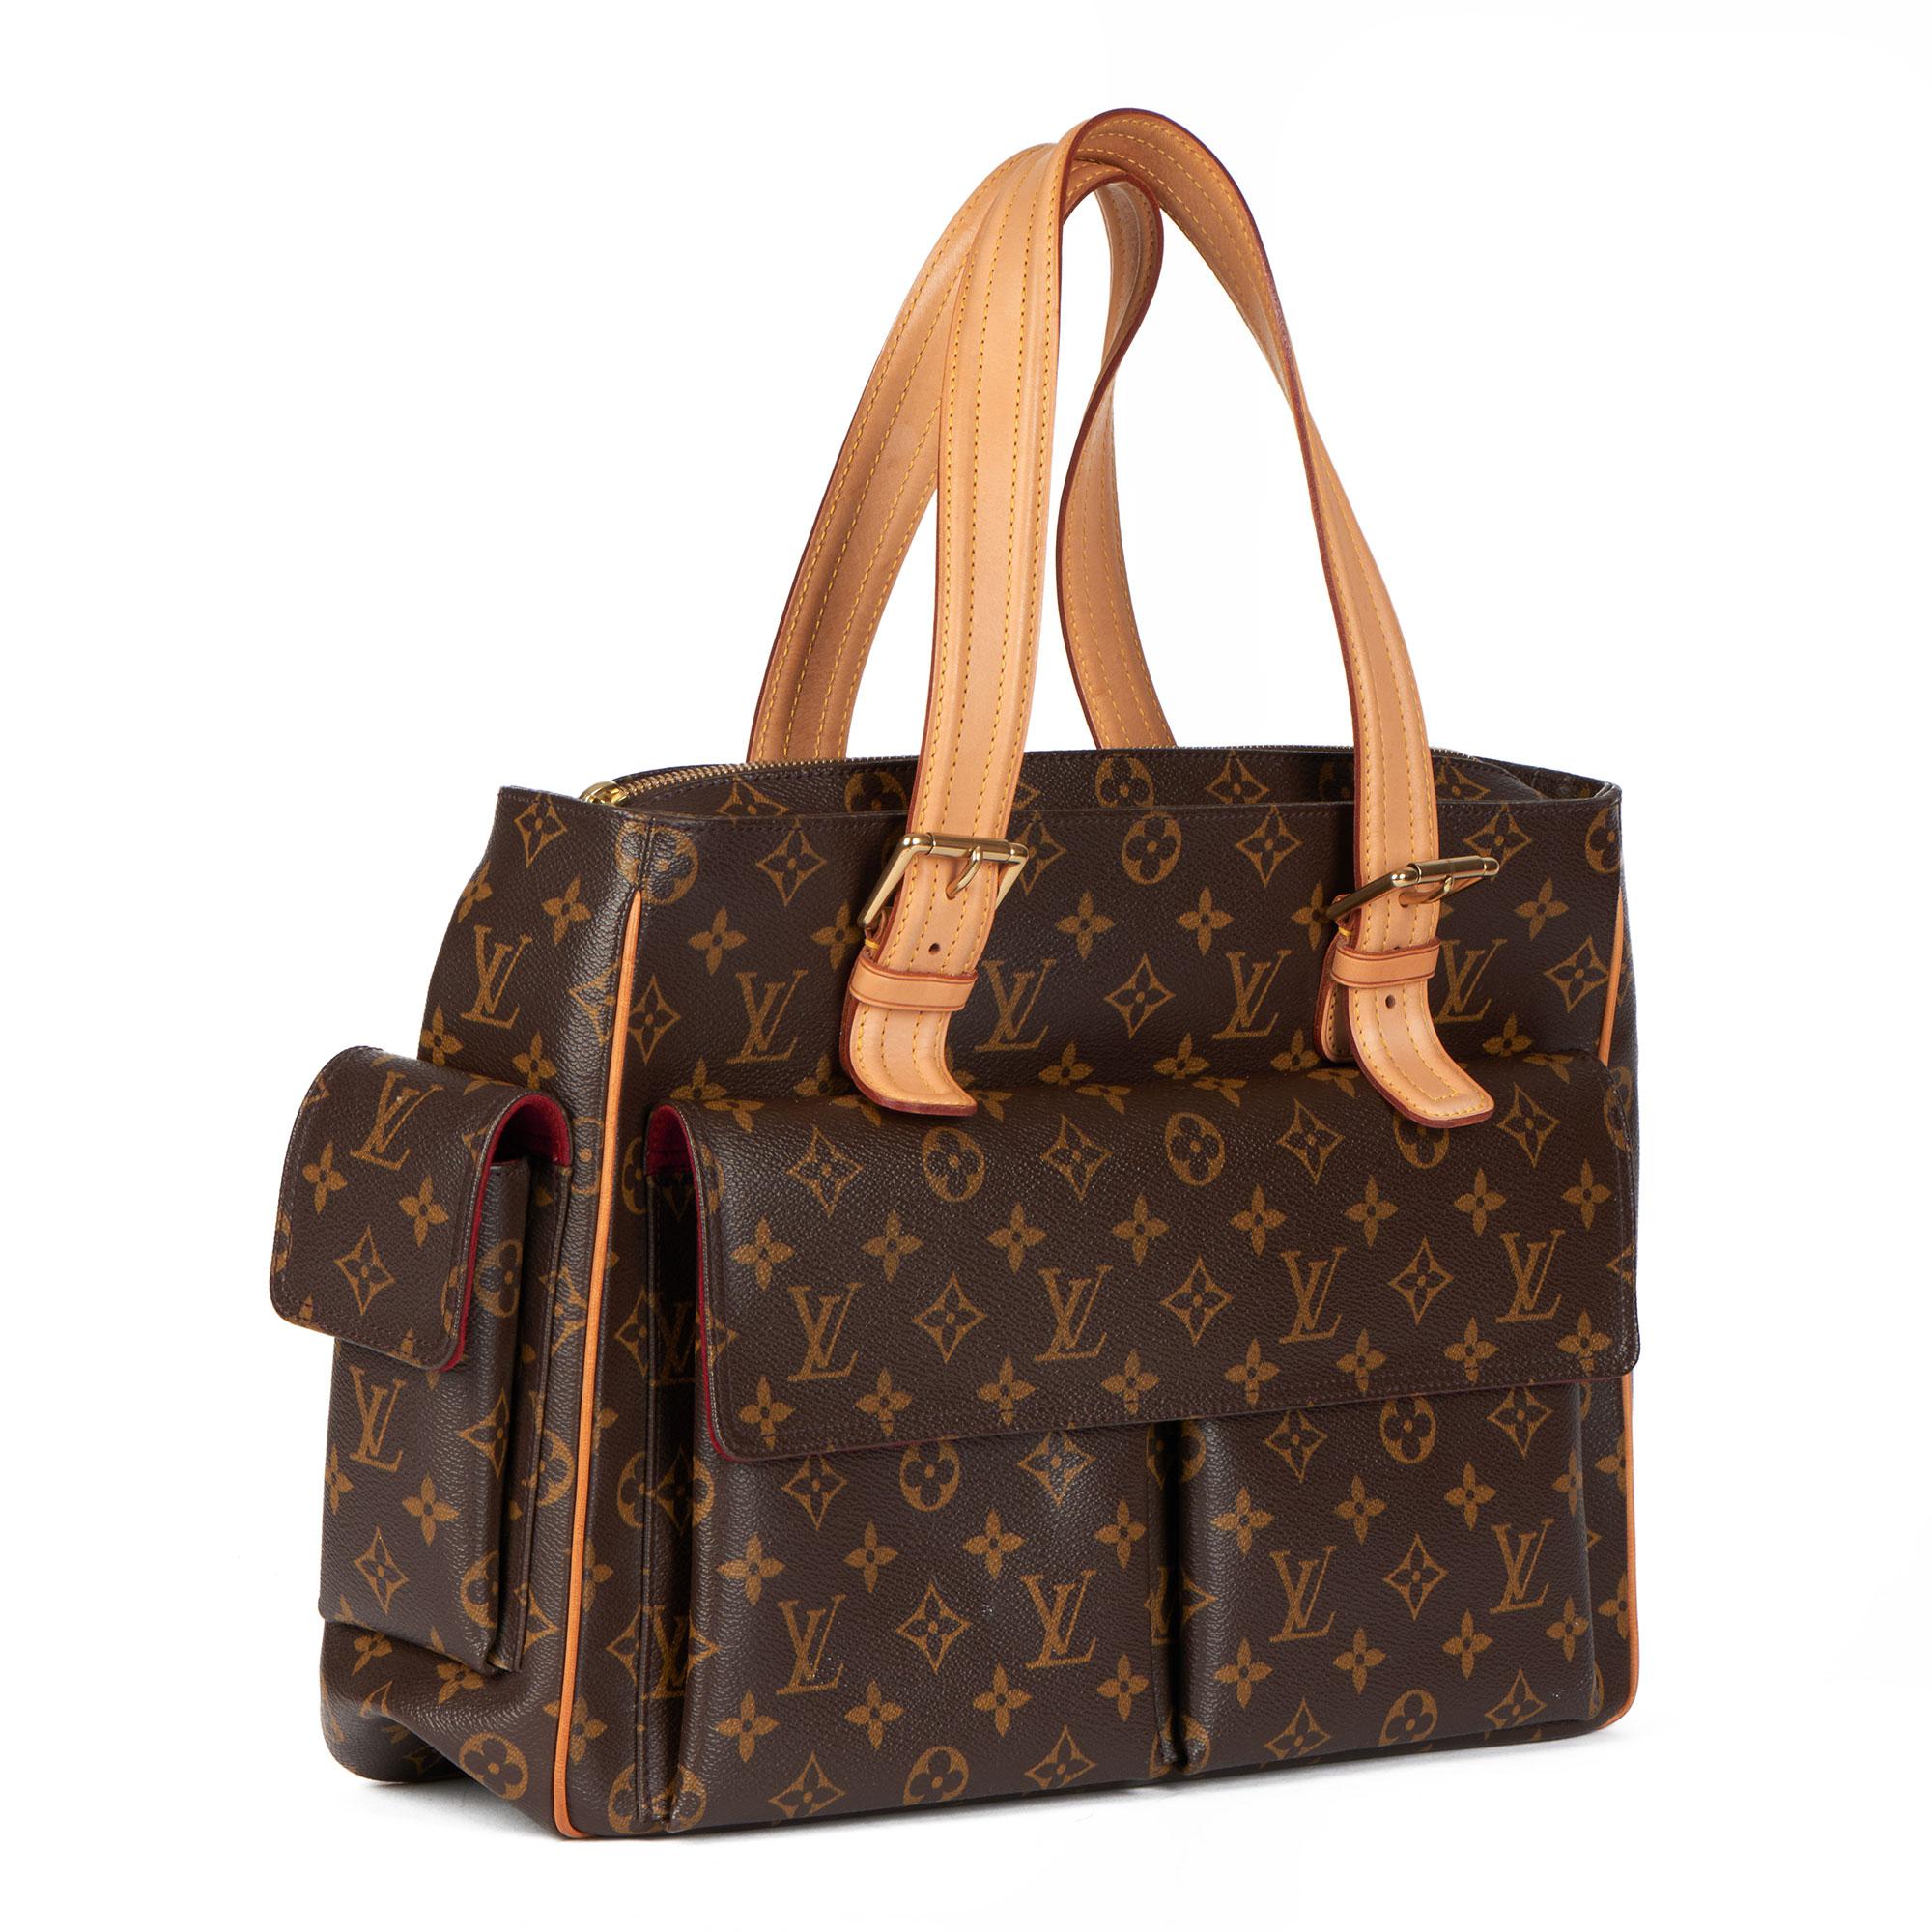 LOUIS VUITTON
Brown Monogram Coated Canvas & Vachetta Leather Multipli Cite

Xupes Reference: CB374
Serial Number: MB1013
Age (Circa): 2003
Authenticity Details: Date Stamp (Made in France) 
Gender: Ladies
Type: Shoulder, Tote

Colour: